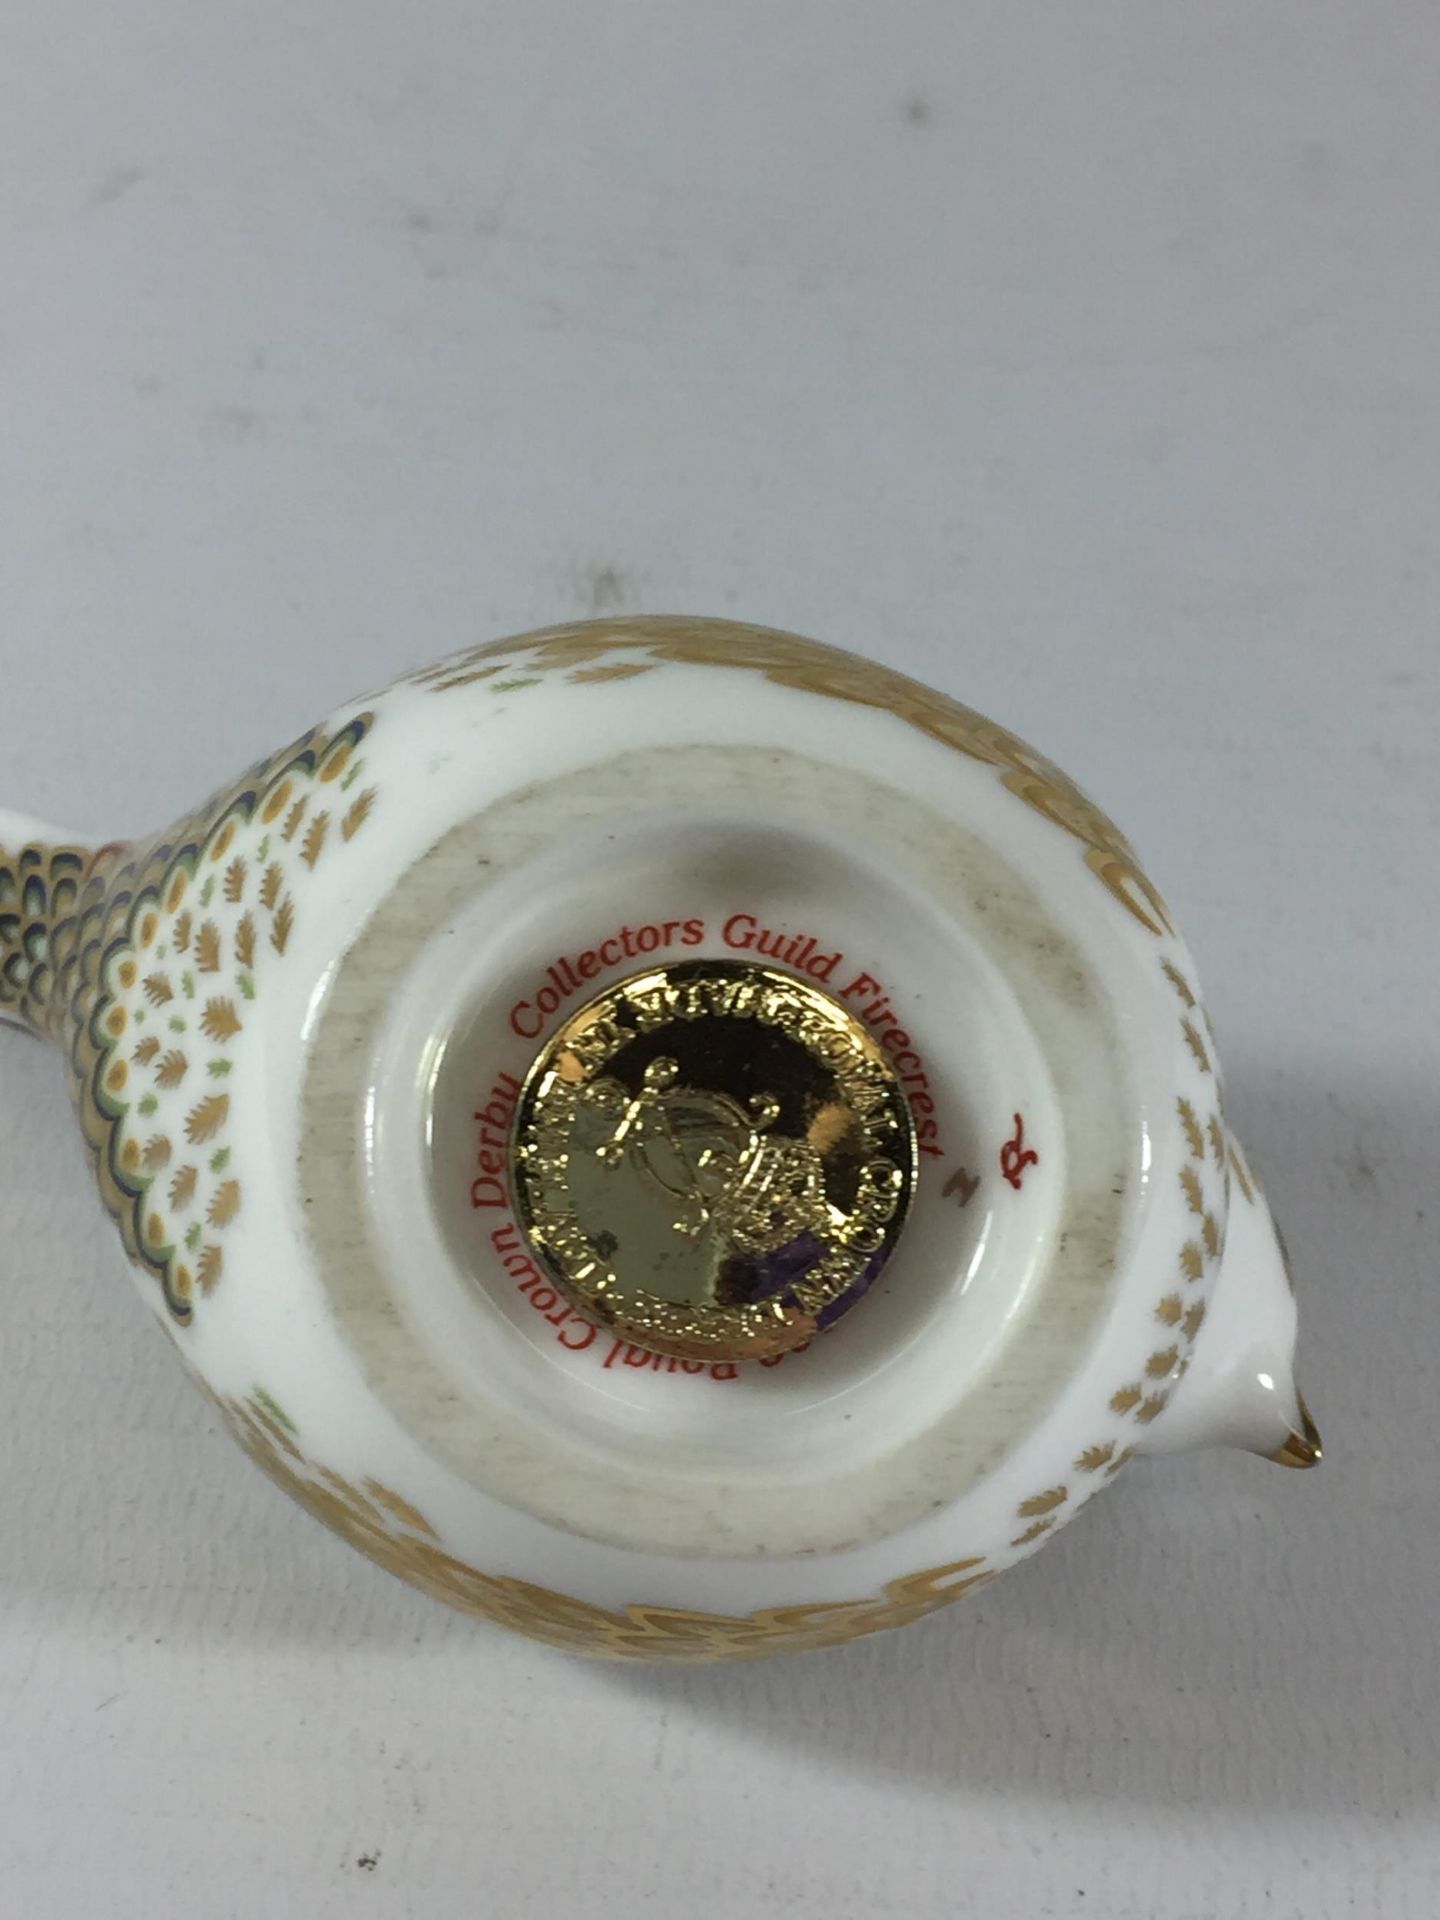 A ROYAL CROWN DERBY FIRECREST COLLECTORS GUILD PAPERWEIGHT - Image 3 of 3